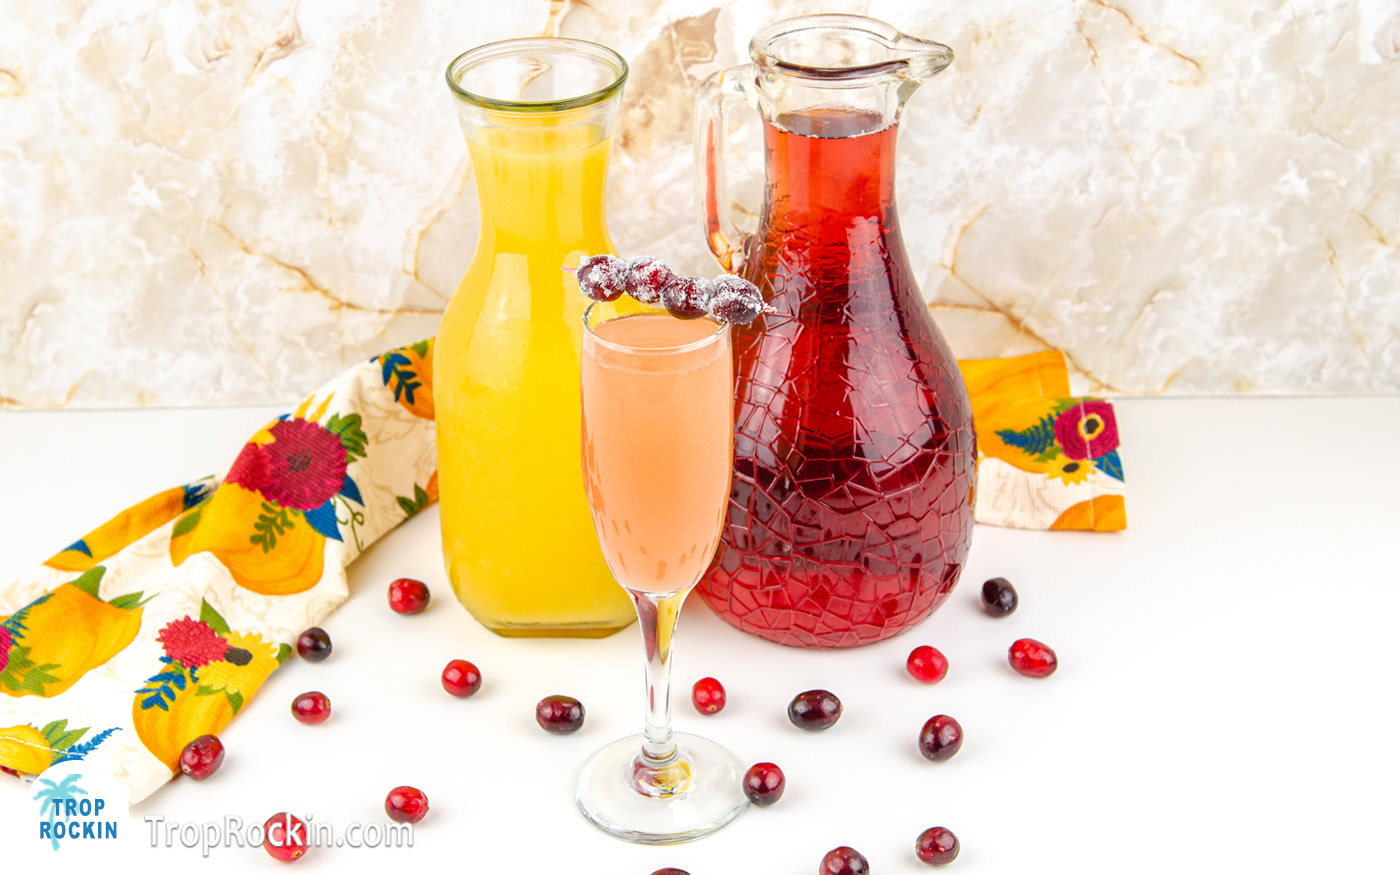 Cranberry Orange Mimosa with a caraft of Orange Juce and a pitcher of Cranberry Juice.